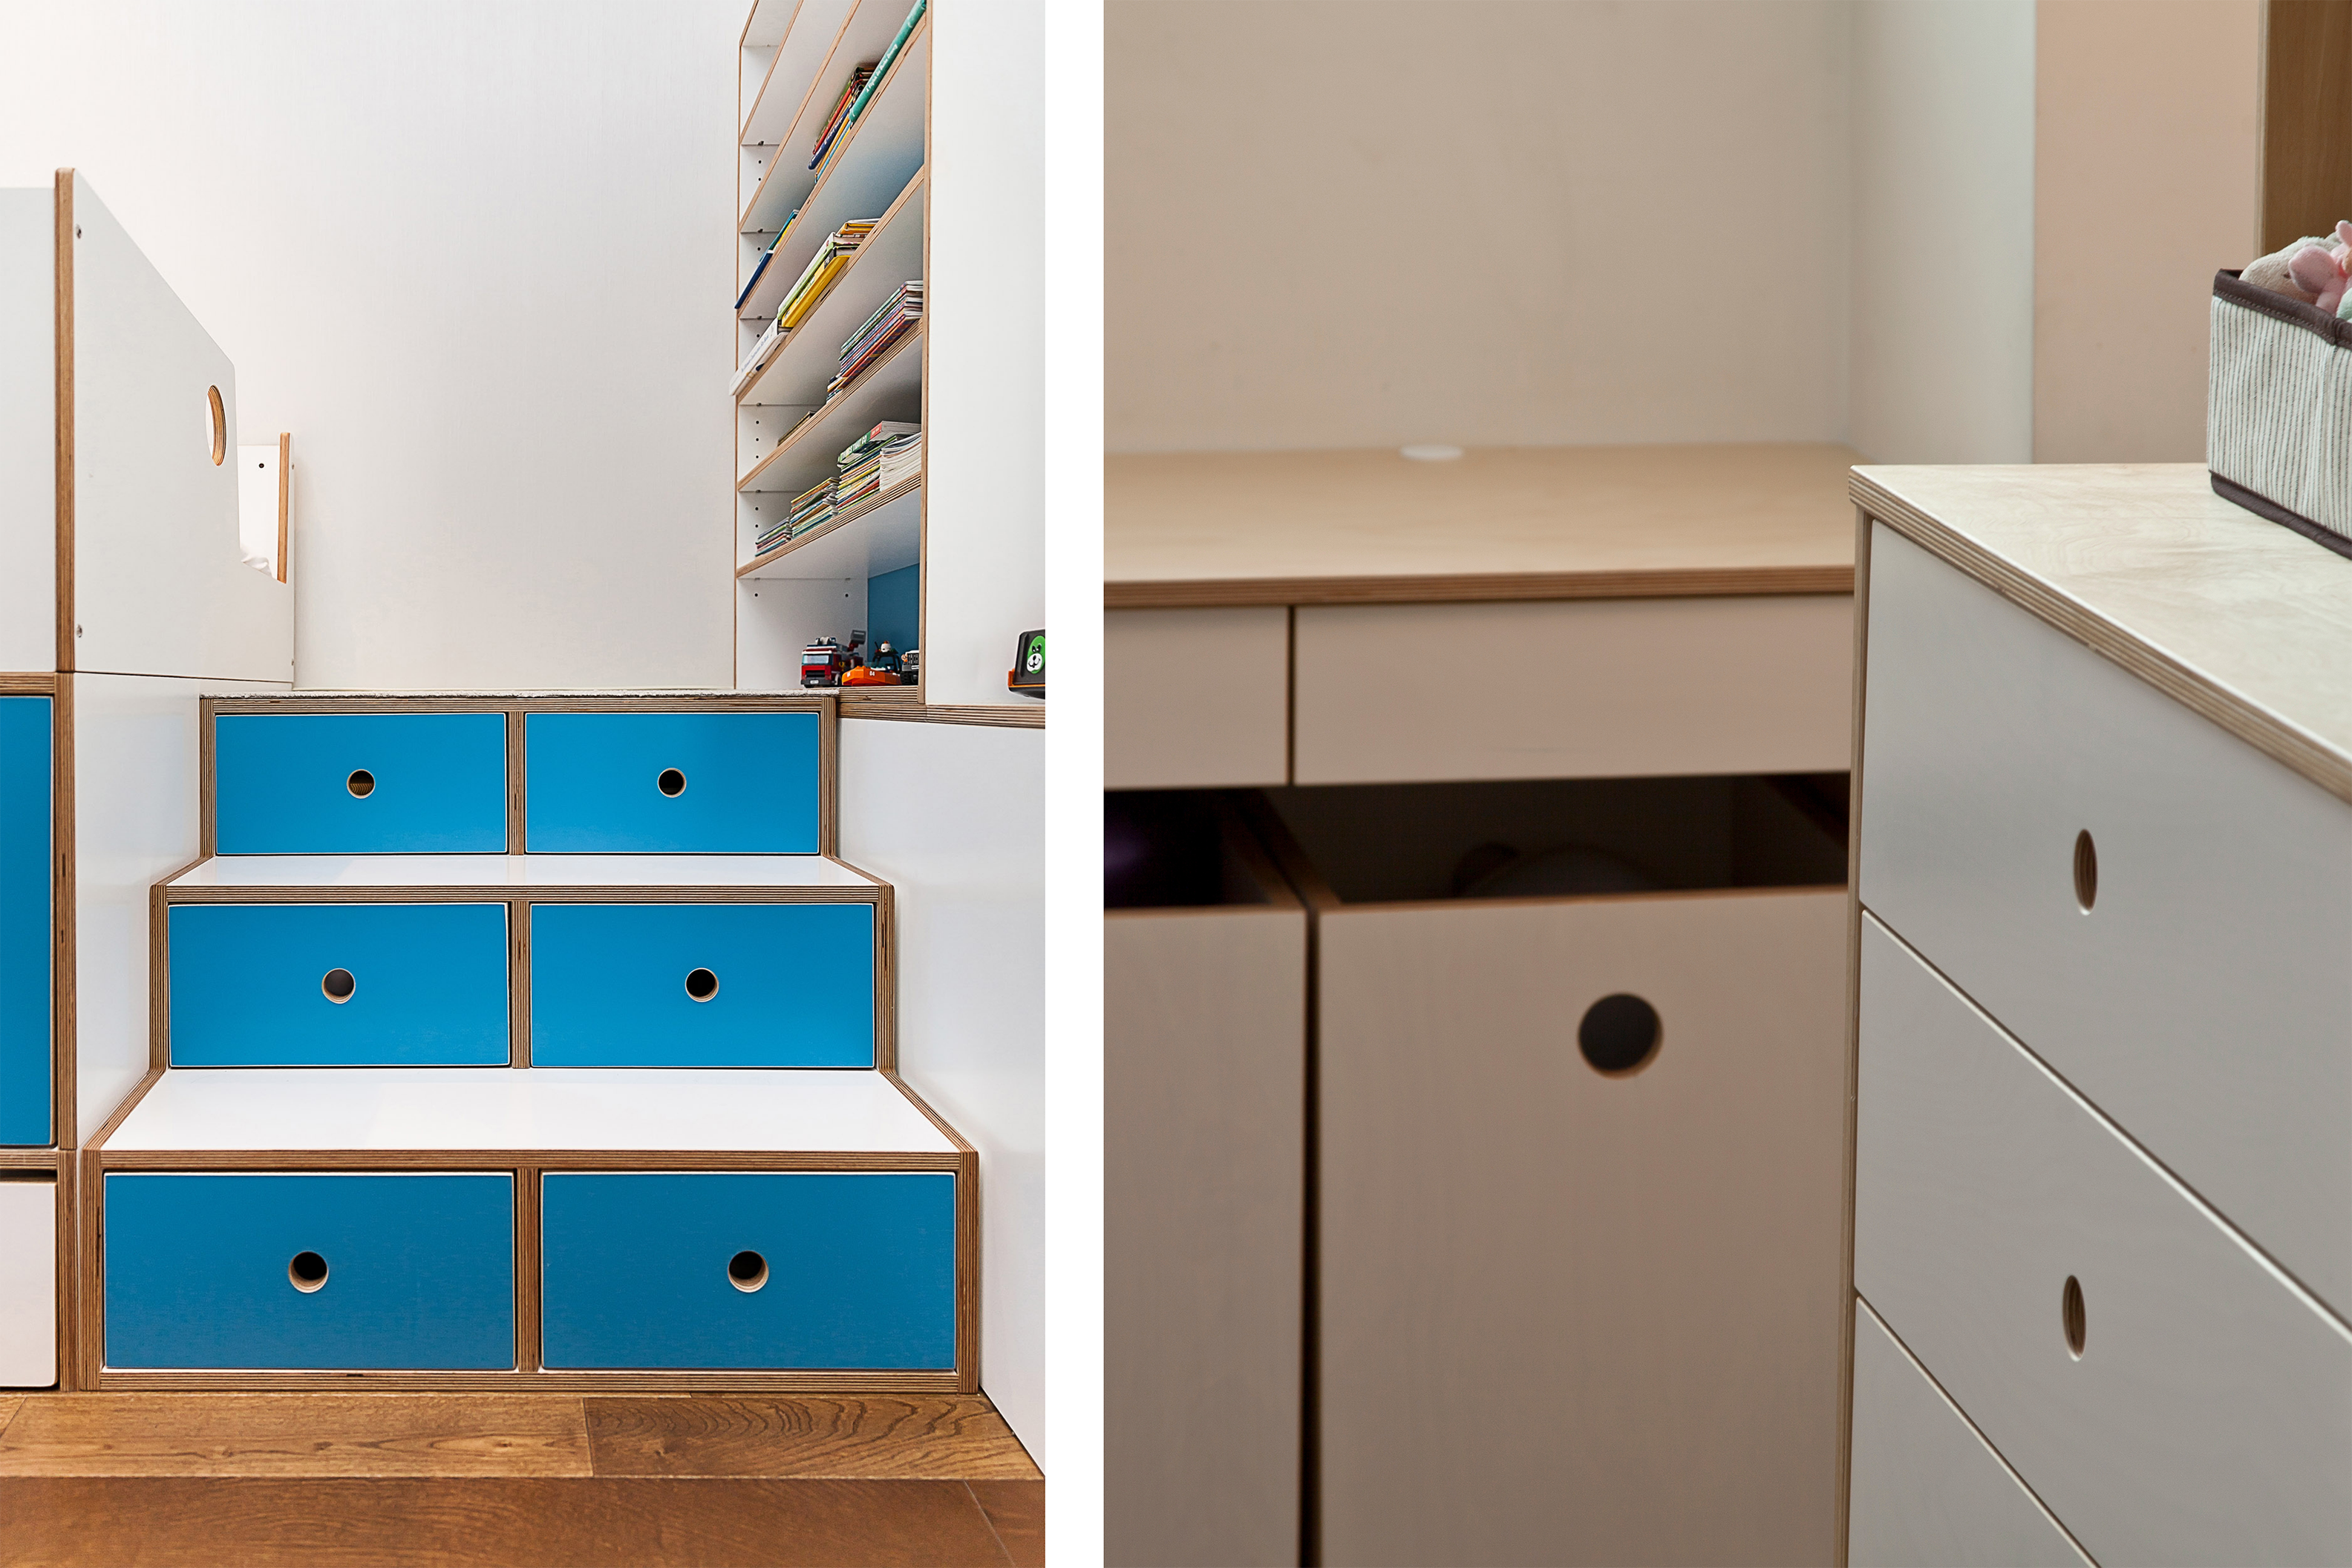 Split image showing blue storage bins in a white shelving unit and a close-up of a modern drawer.